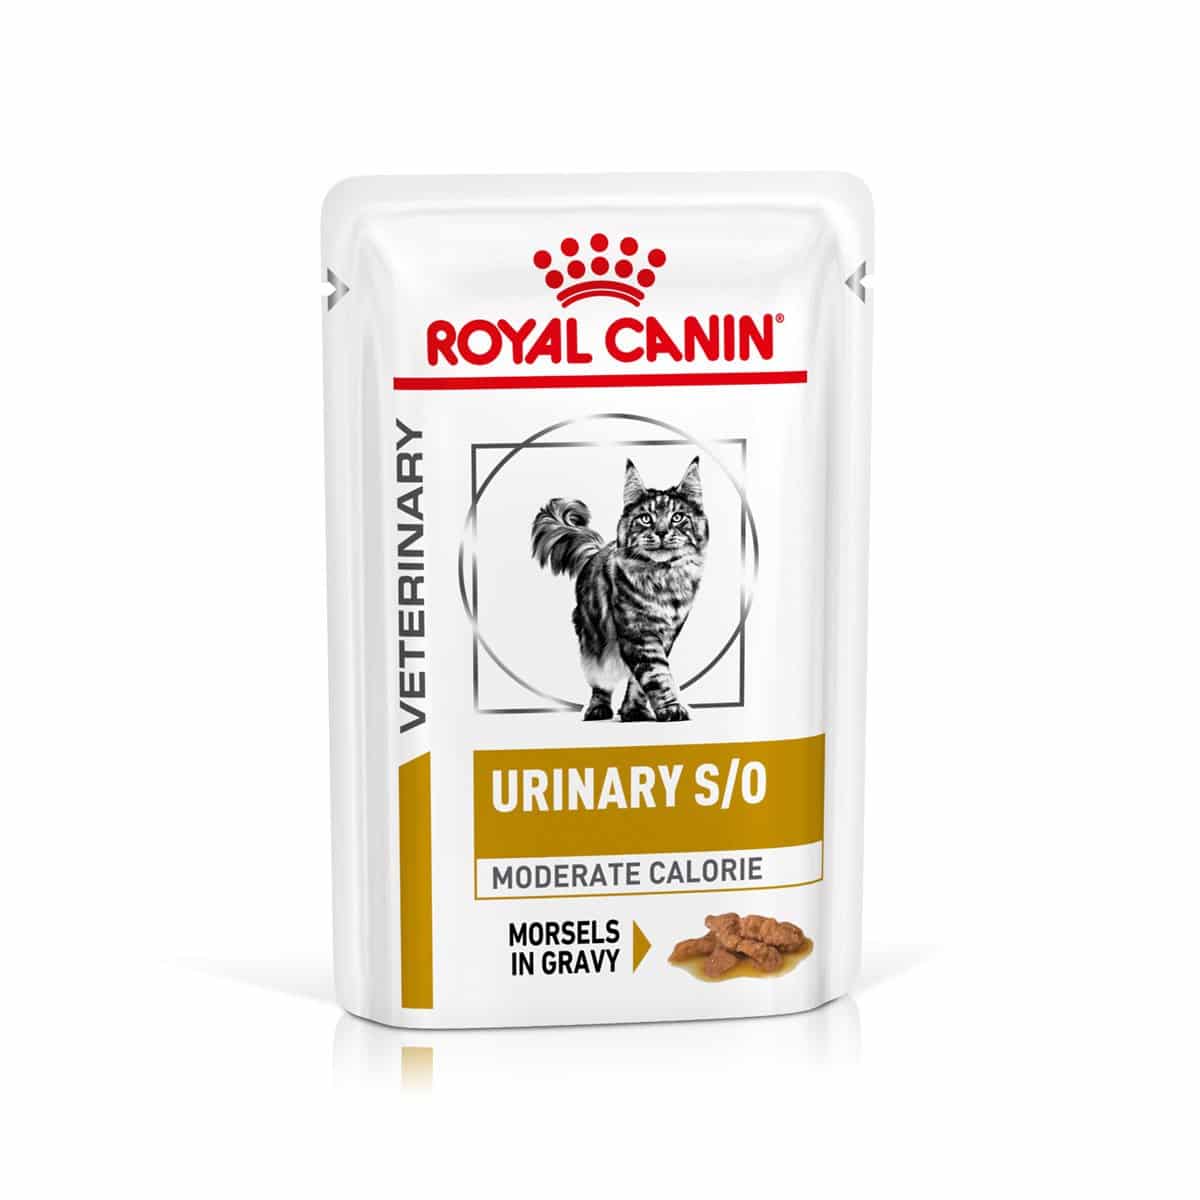 ROYAL CANIN® URINARY S/O MODERATE CALORIE Häppchen in Soße 12x85g